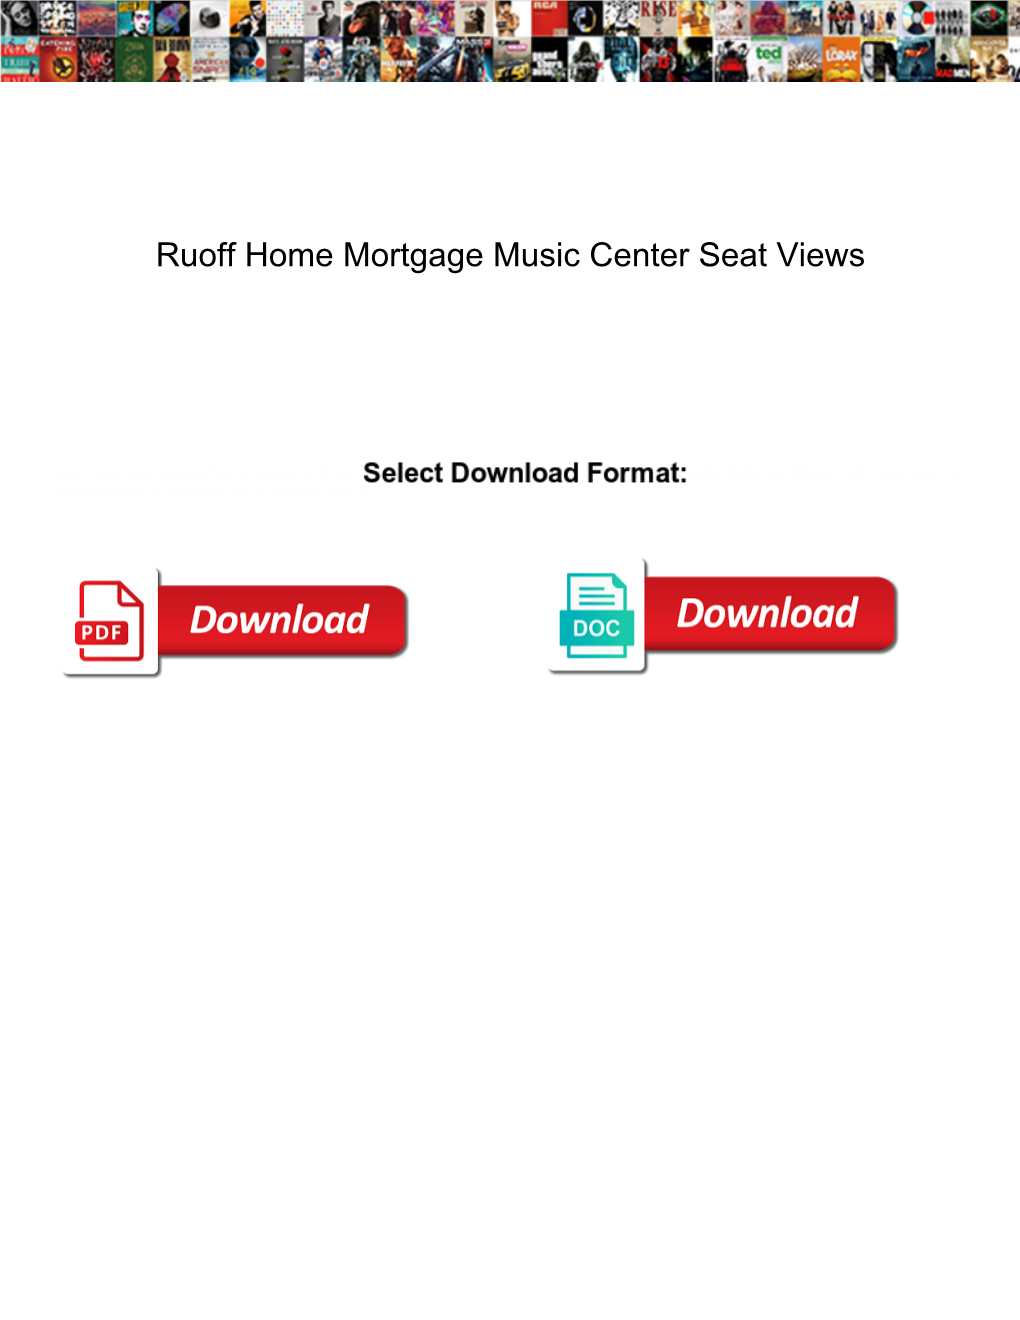 Ruoff Home Mortgage Music Center Seat Views